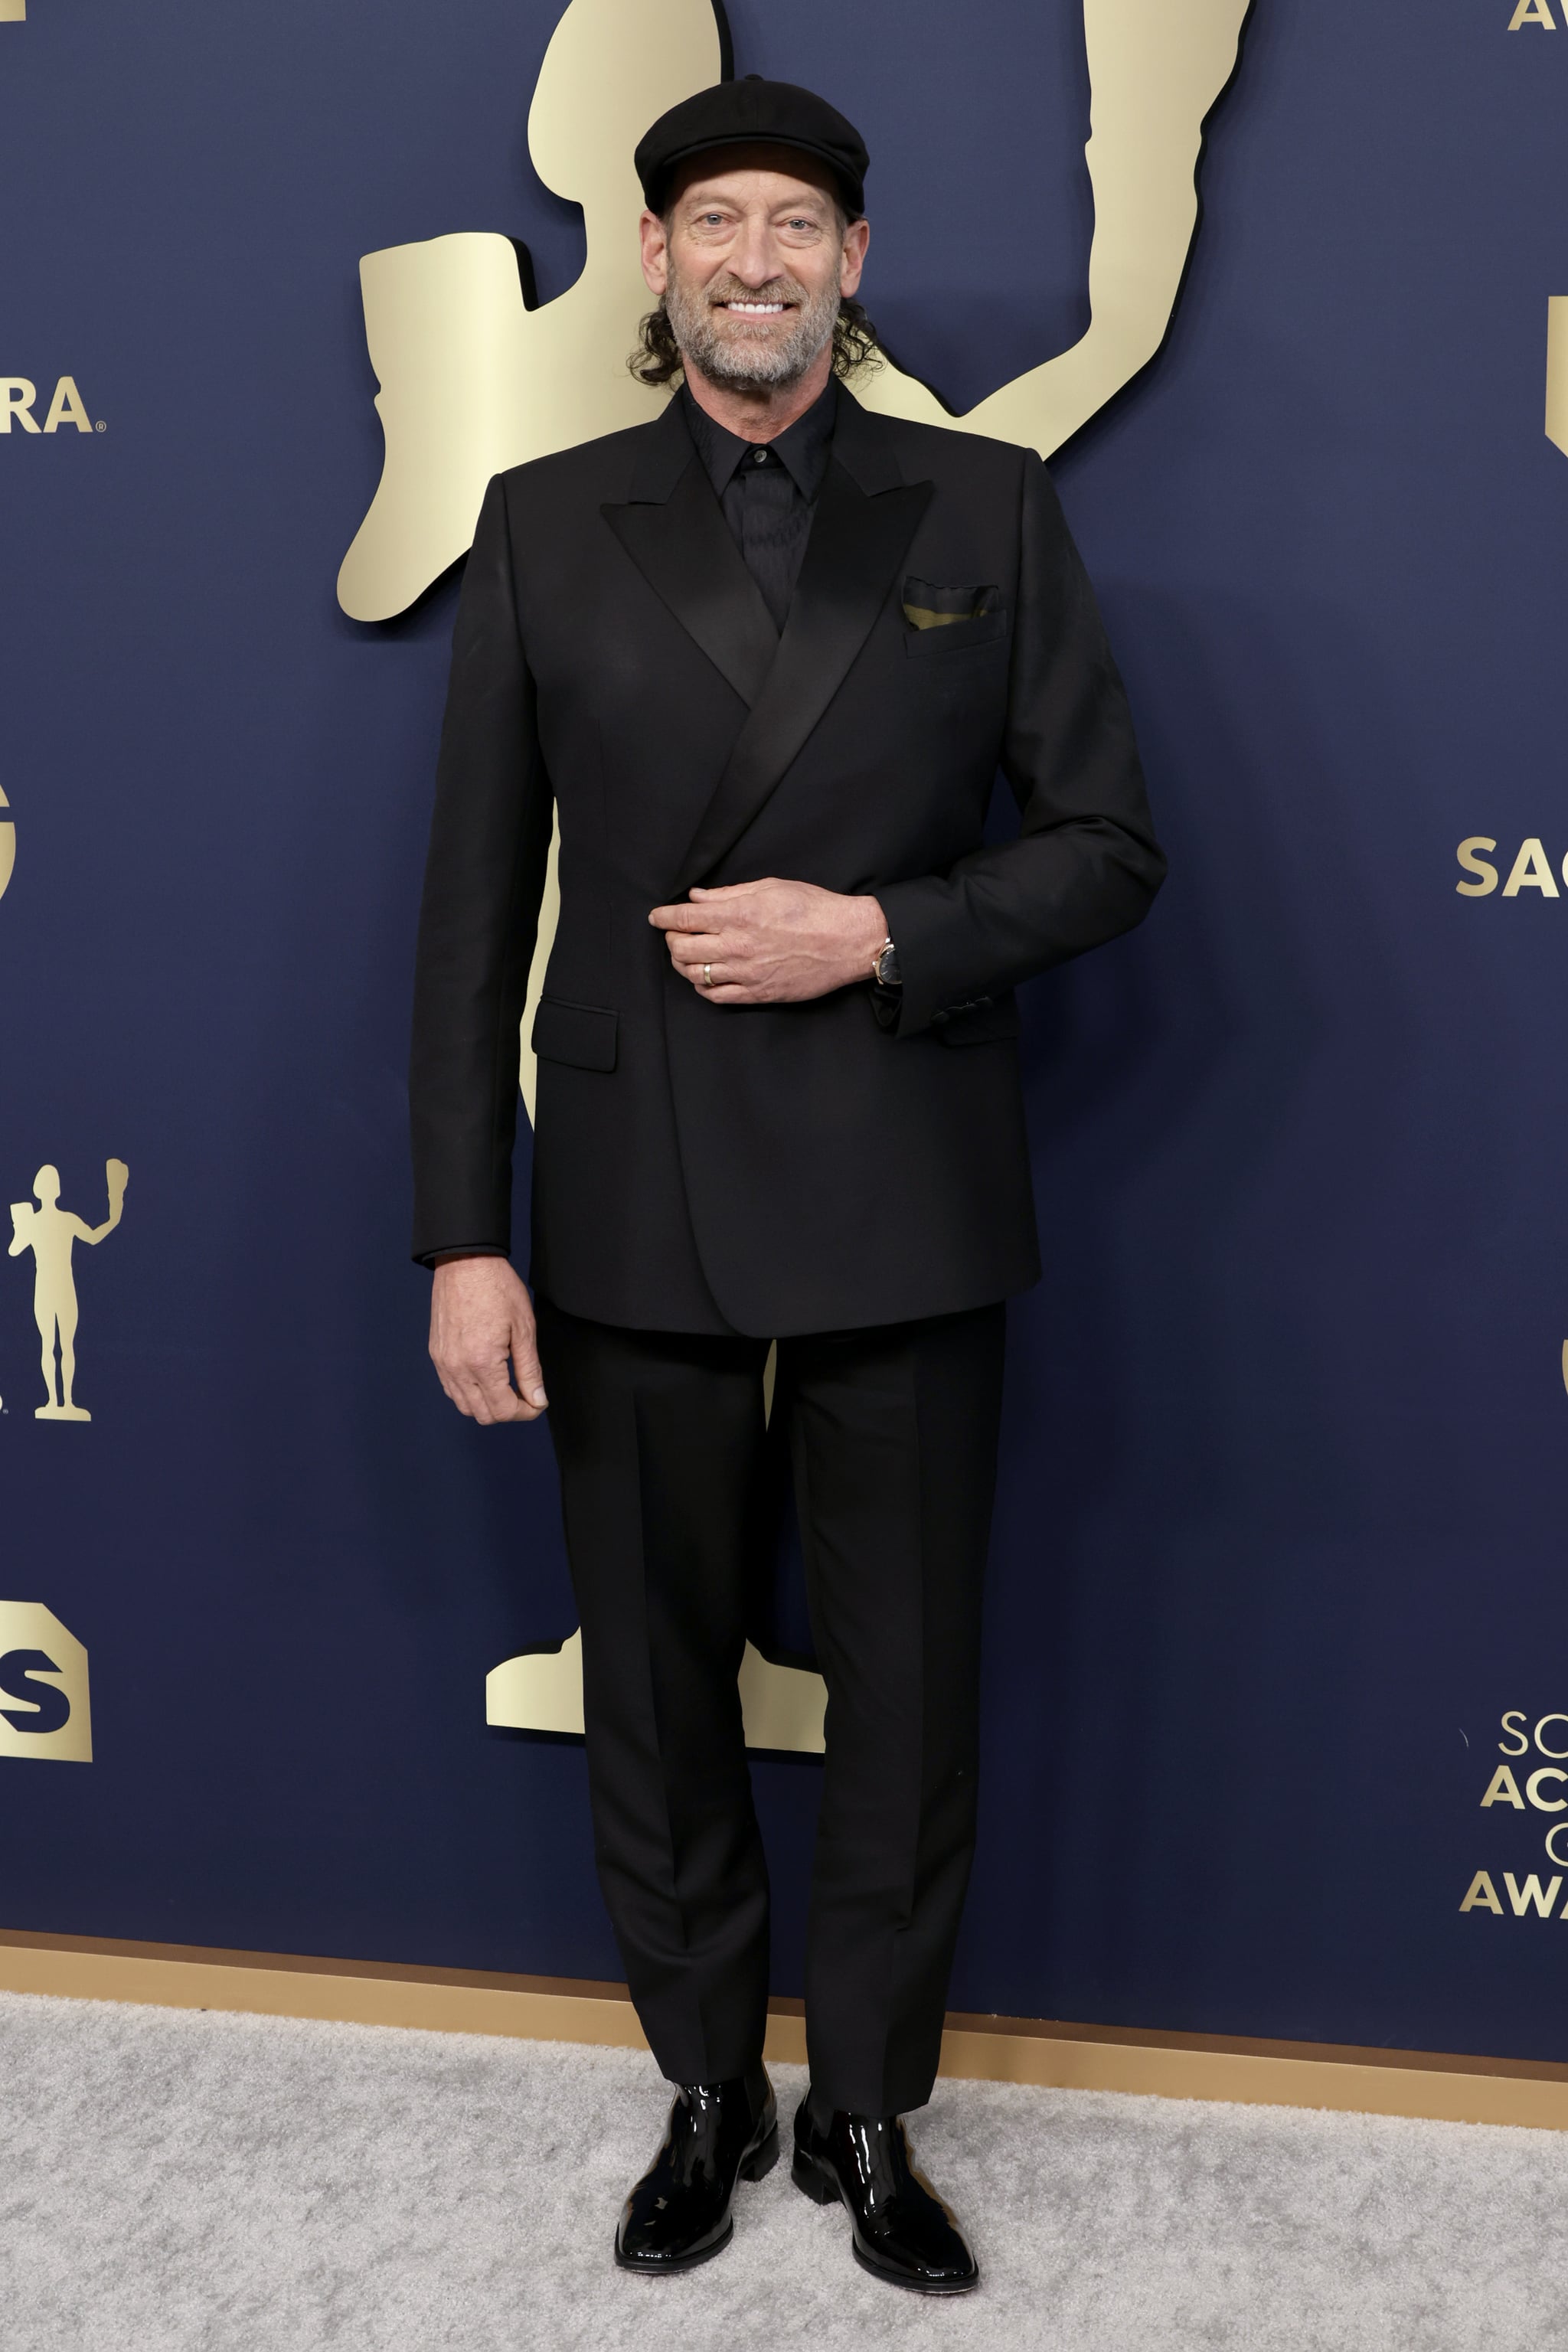 SANTA MONICA, CALIFORNIA - FEBRUARY 27: Troy Kotsur attends the 28th Annual Screen Actors Guild Awards at Barker Hangar on February 27, 2022 in Santa Monica, California. (Photo by Frazer Harrison/Getty Images)